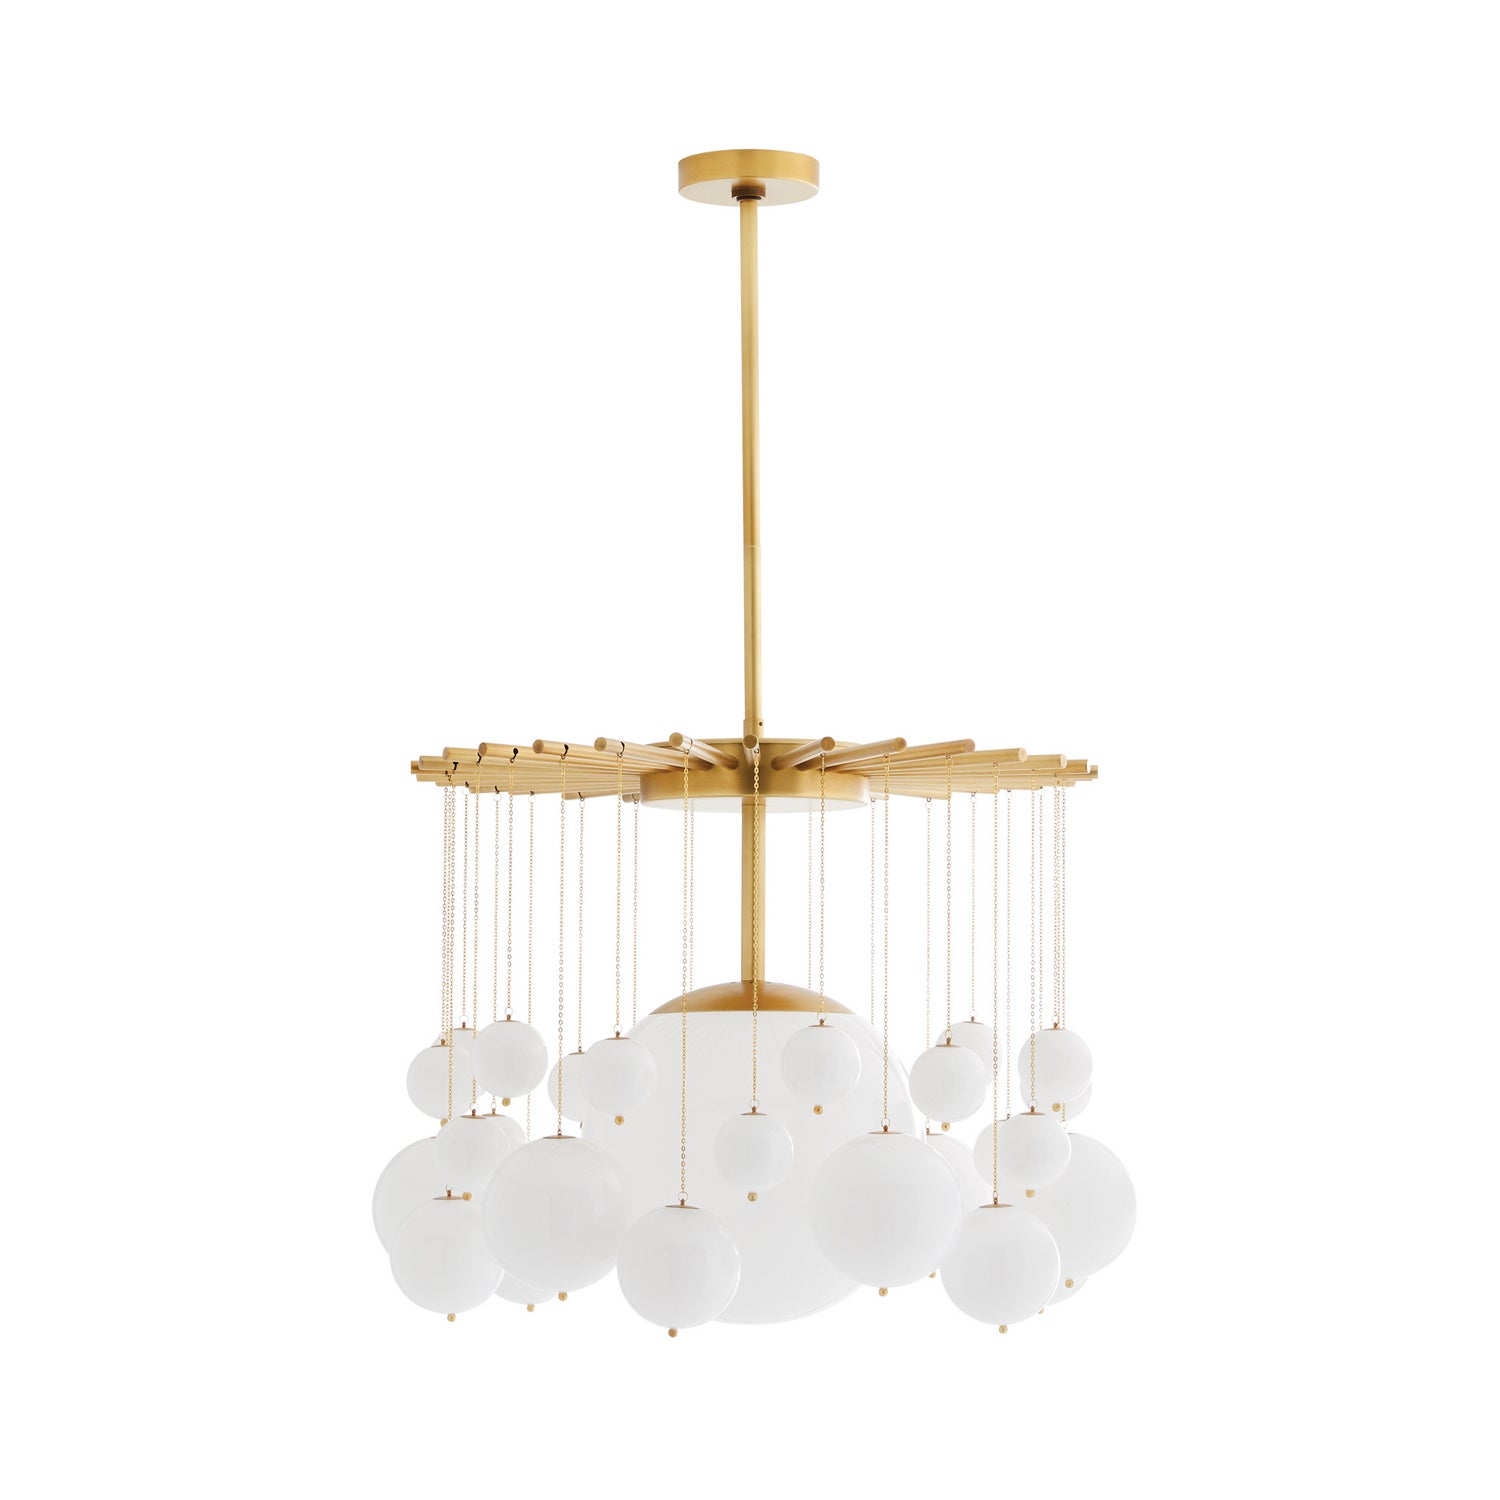 One Light Chandelier from the Mira collection in Antique Brass finish